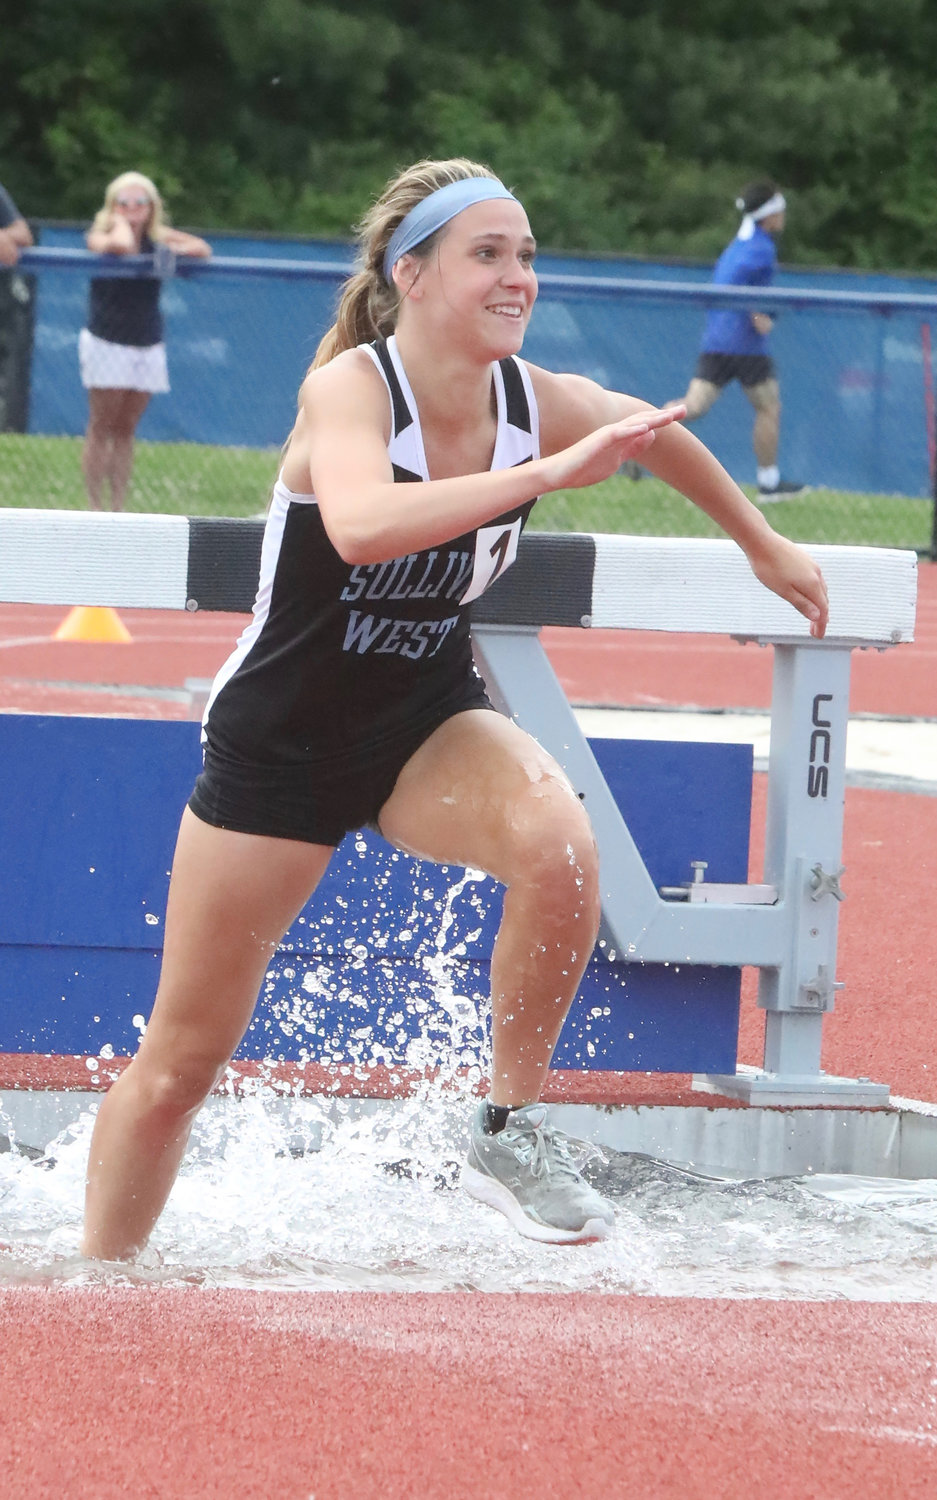 Sullivan West senior Grace Boyd smiles as she exits the water pit during her victory in the 2000 steeplechase. SW swept the event with the help of Ella Herbert and Brooke Nunnari for a 24-point SW addition to the winning ledger.